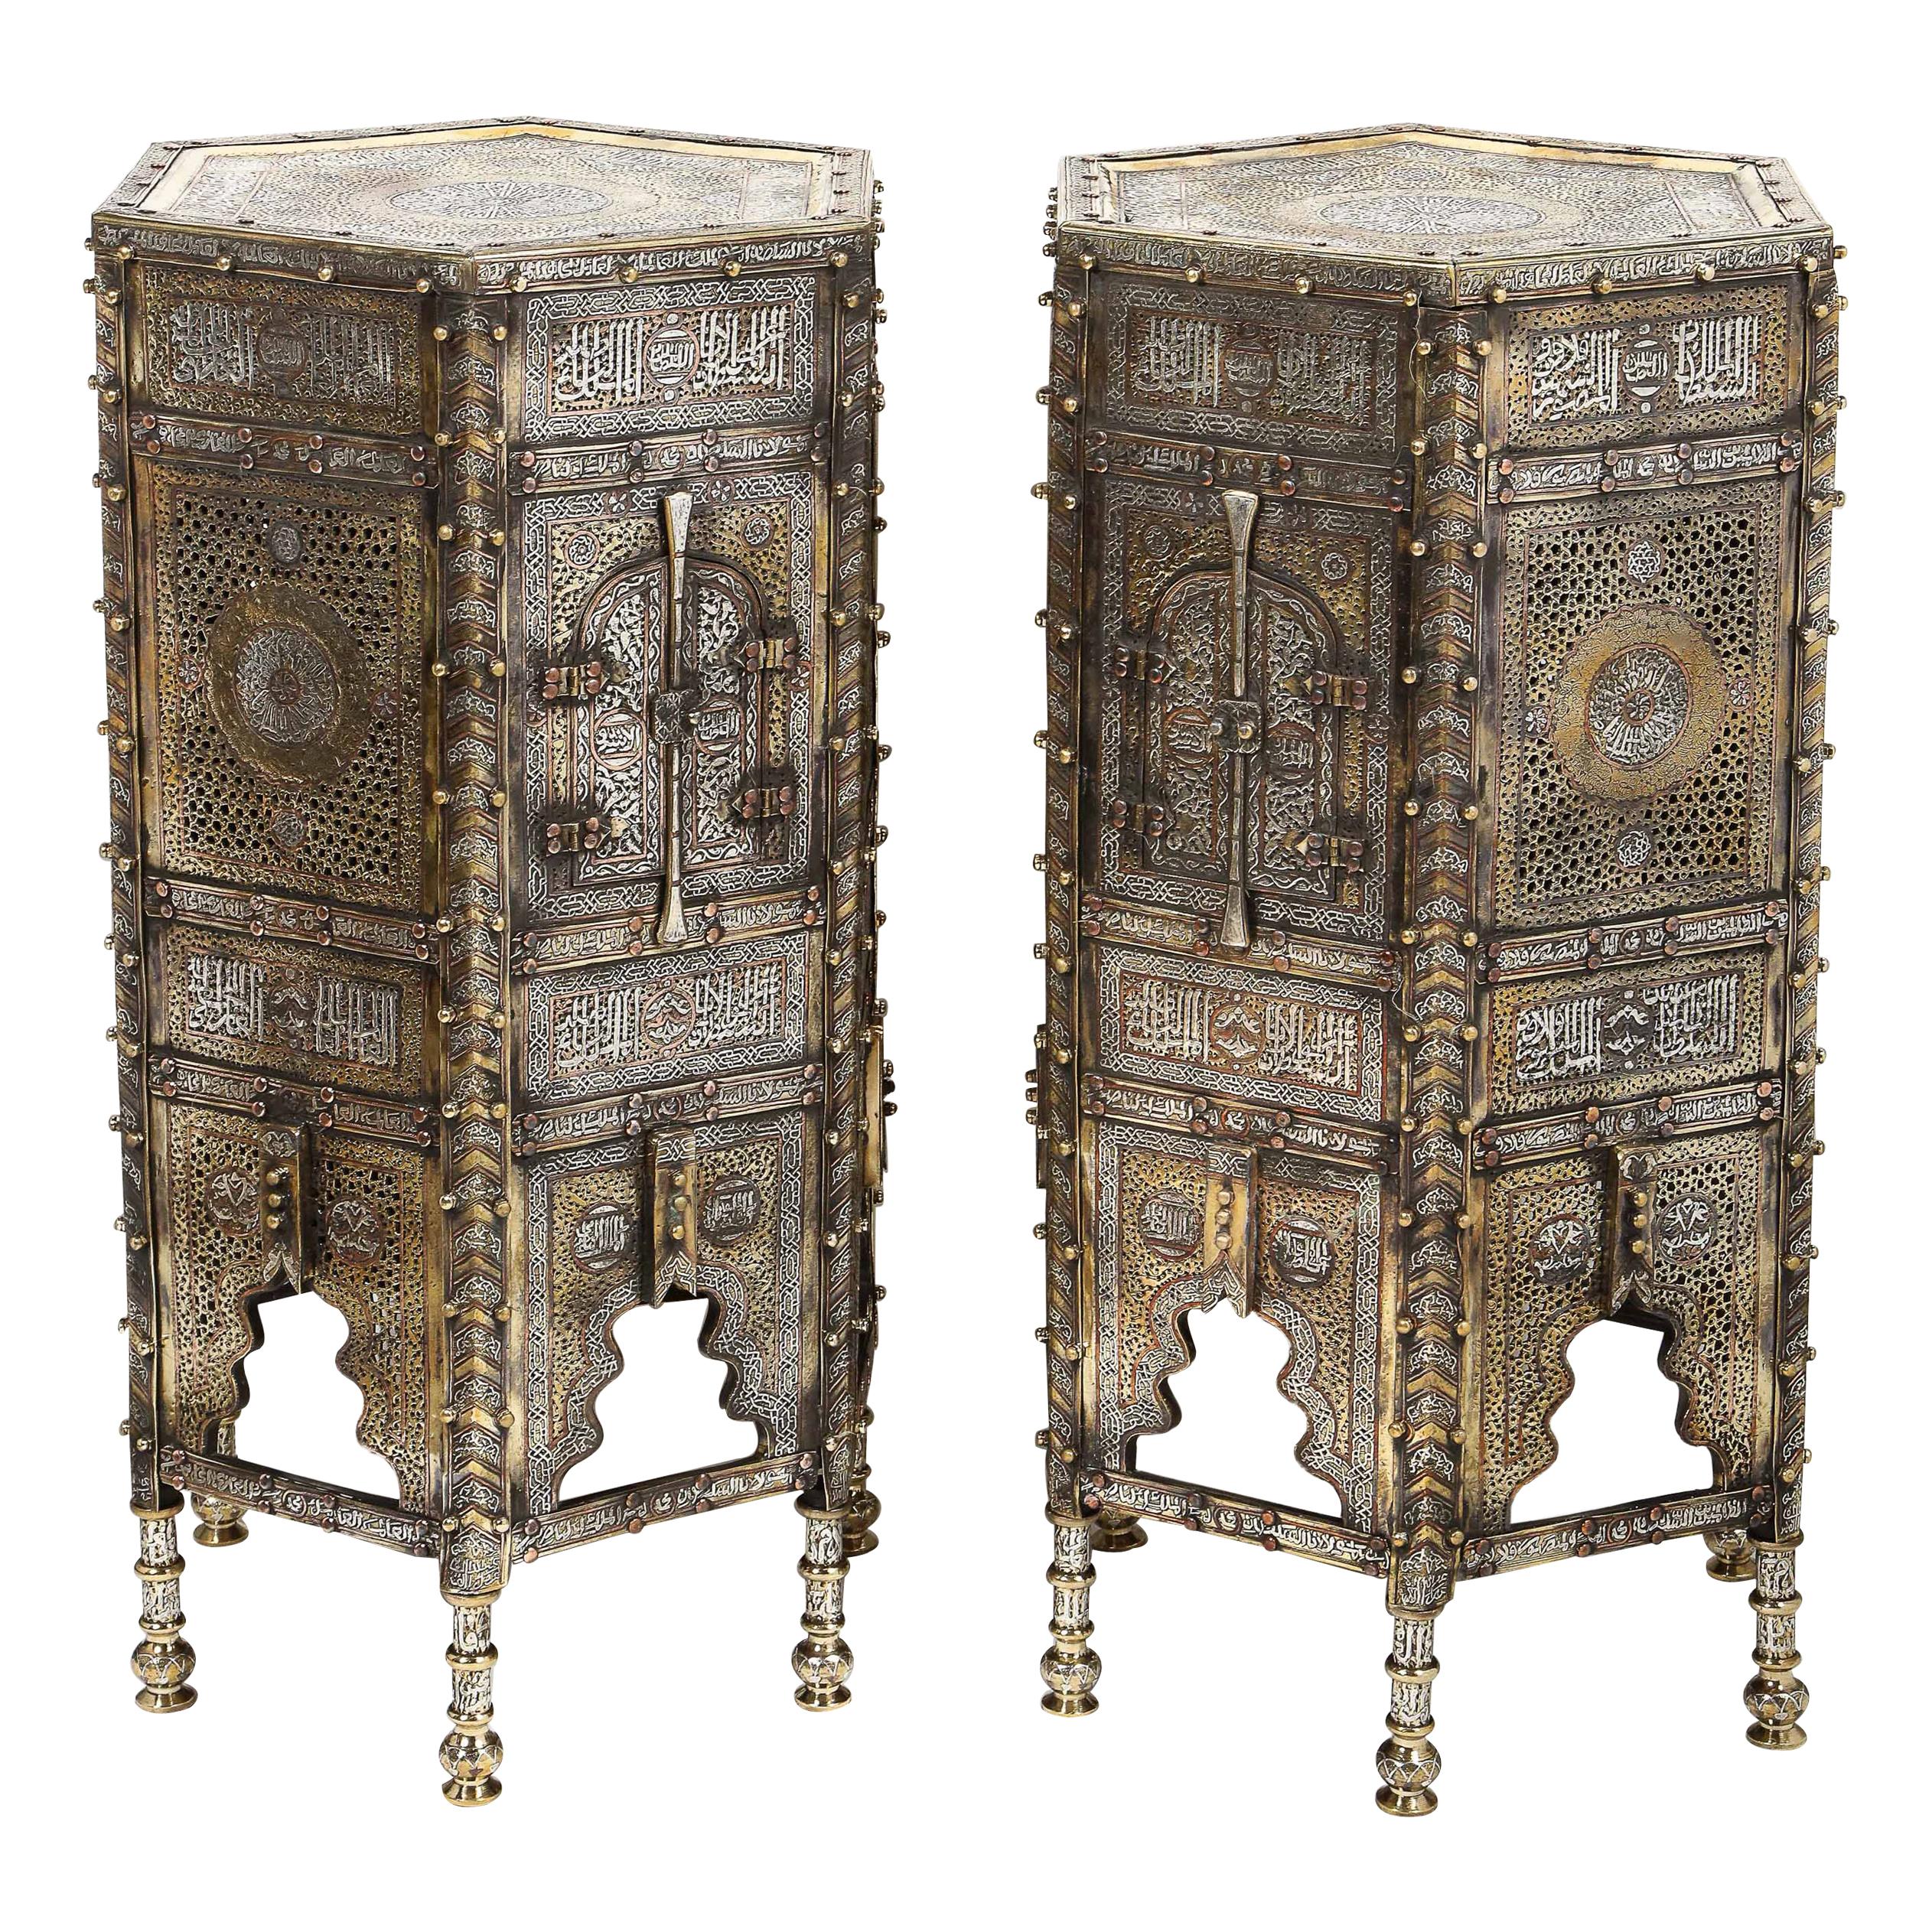 Exceptional Pair of Islamic Mamluk Revival Silver Inlaid Quran Side Tables For Sale